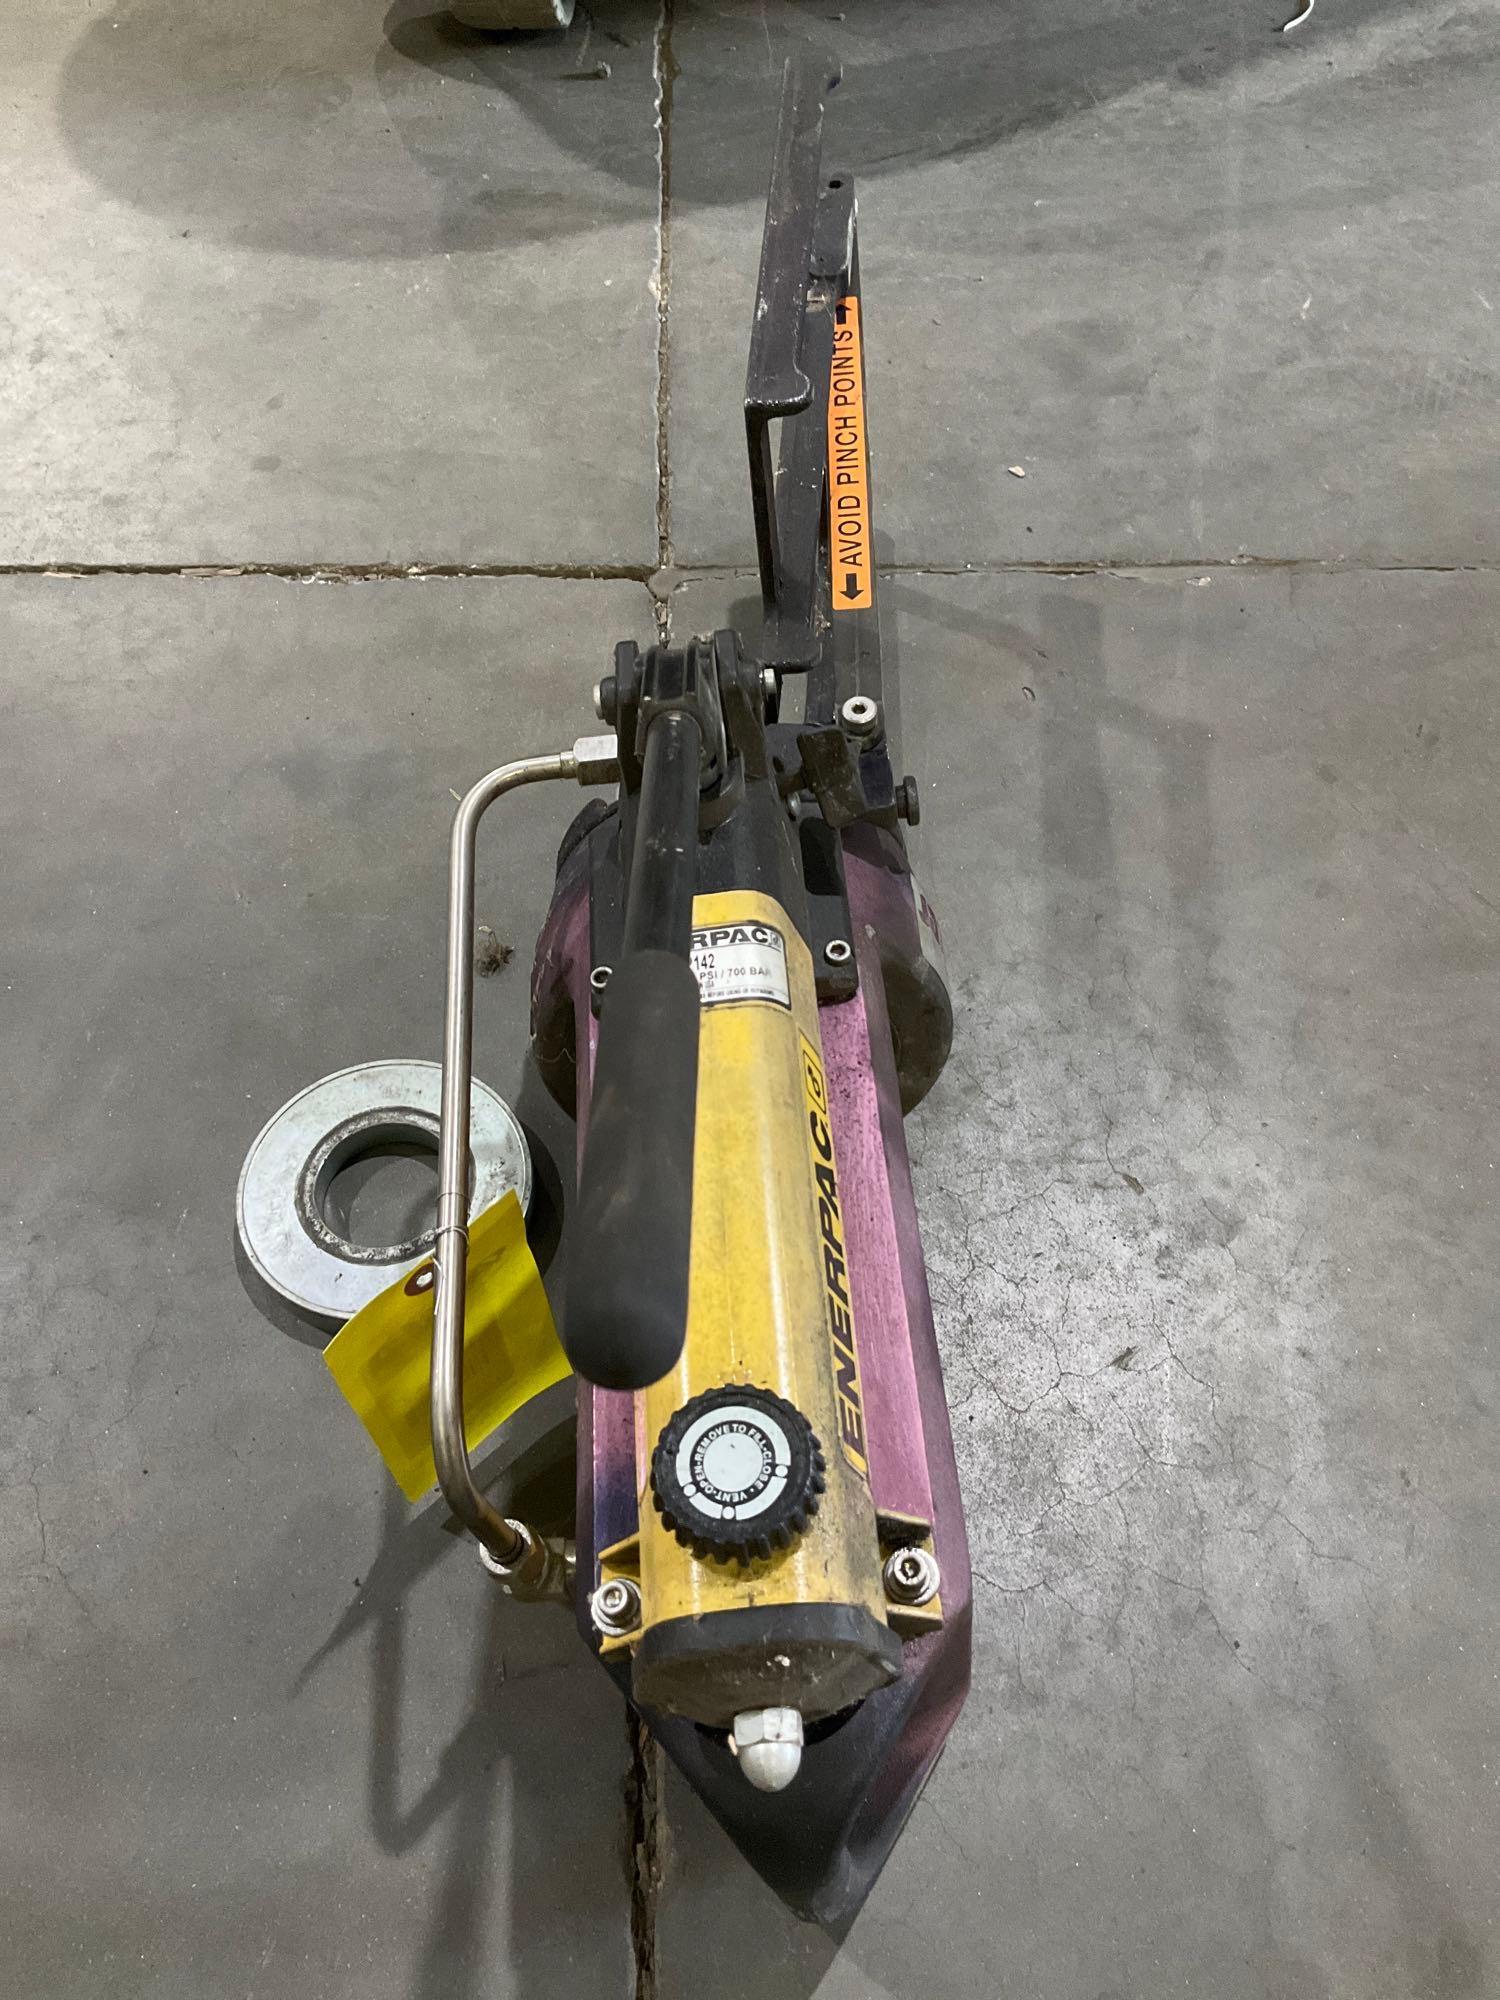 ENERPAC HYDRAULIC HAND PUMP MODEL P142, APPROX MAX PSI 10,000, APPROX 700 BAR